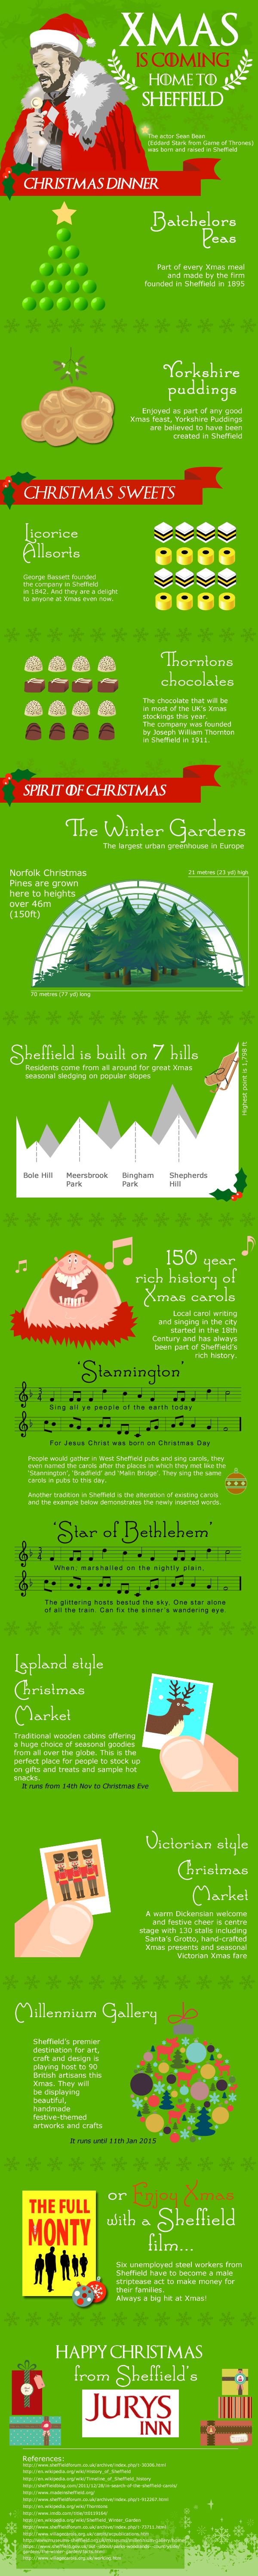 Infographic - Christmas is Coming Home to Sheffield